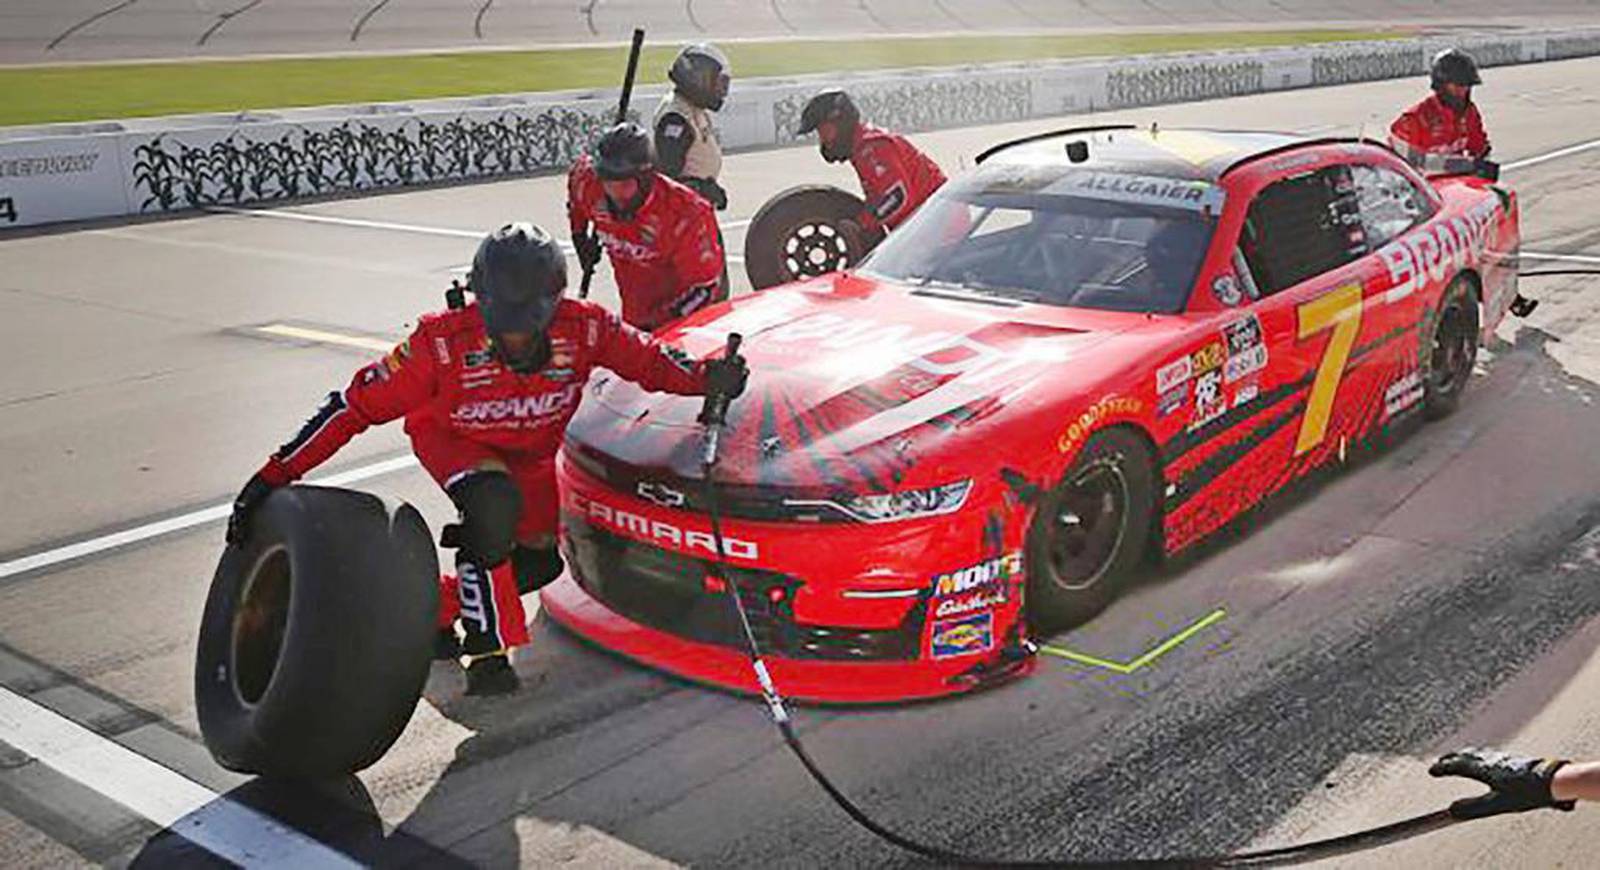 Iowa Speedway races will feature NASCAR’s new pit stop procedure